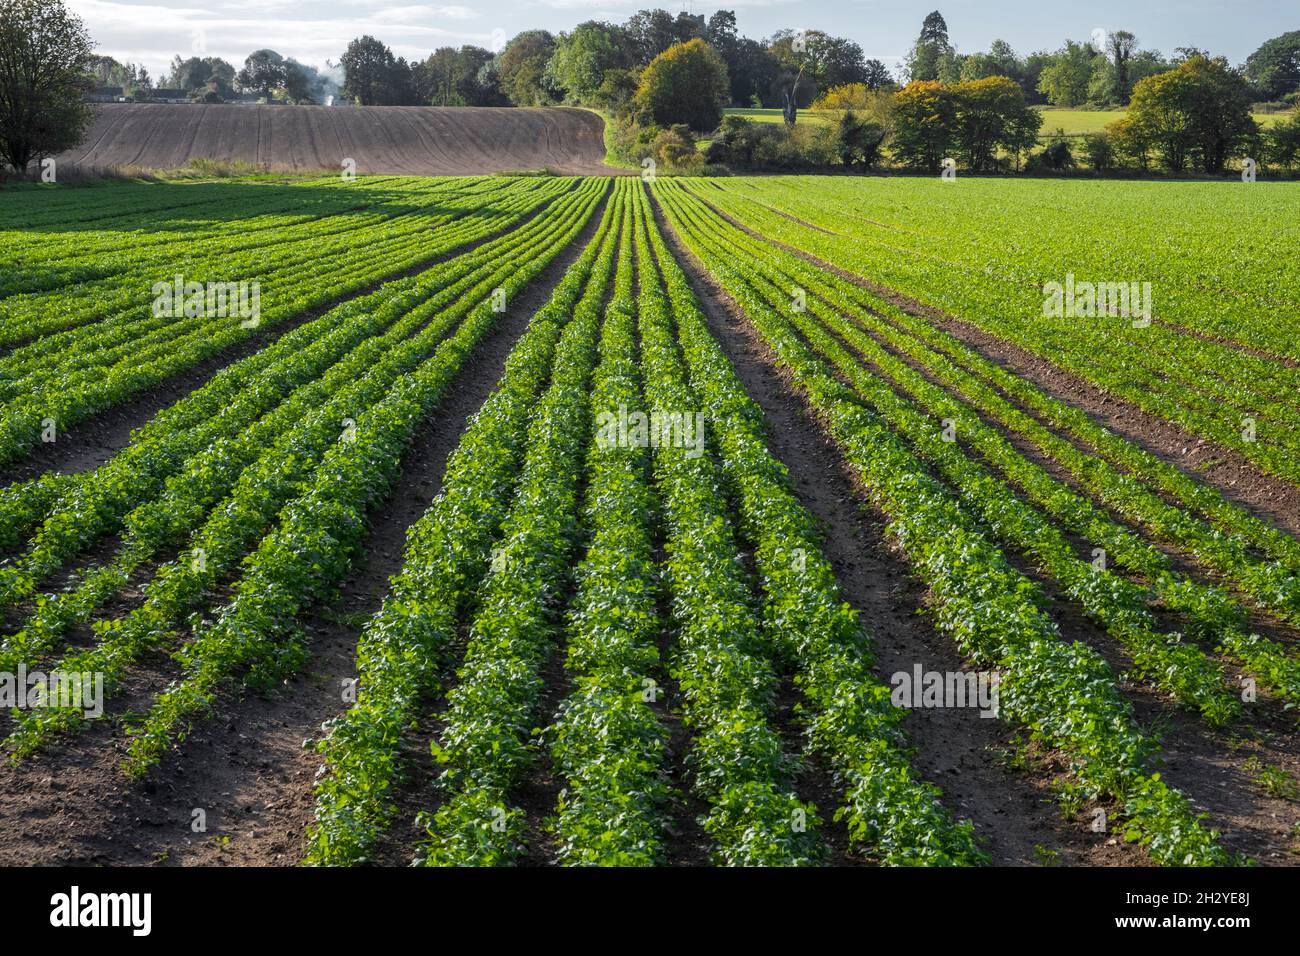 Field of parsley growing in Suffolk, East Anglia, UK. Stock Photo